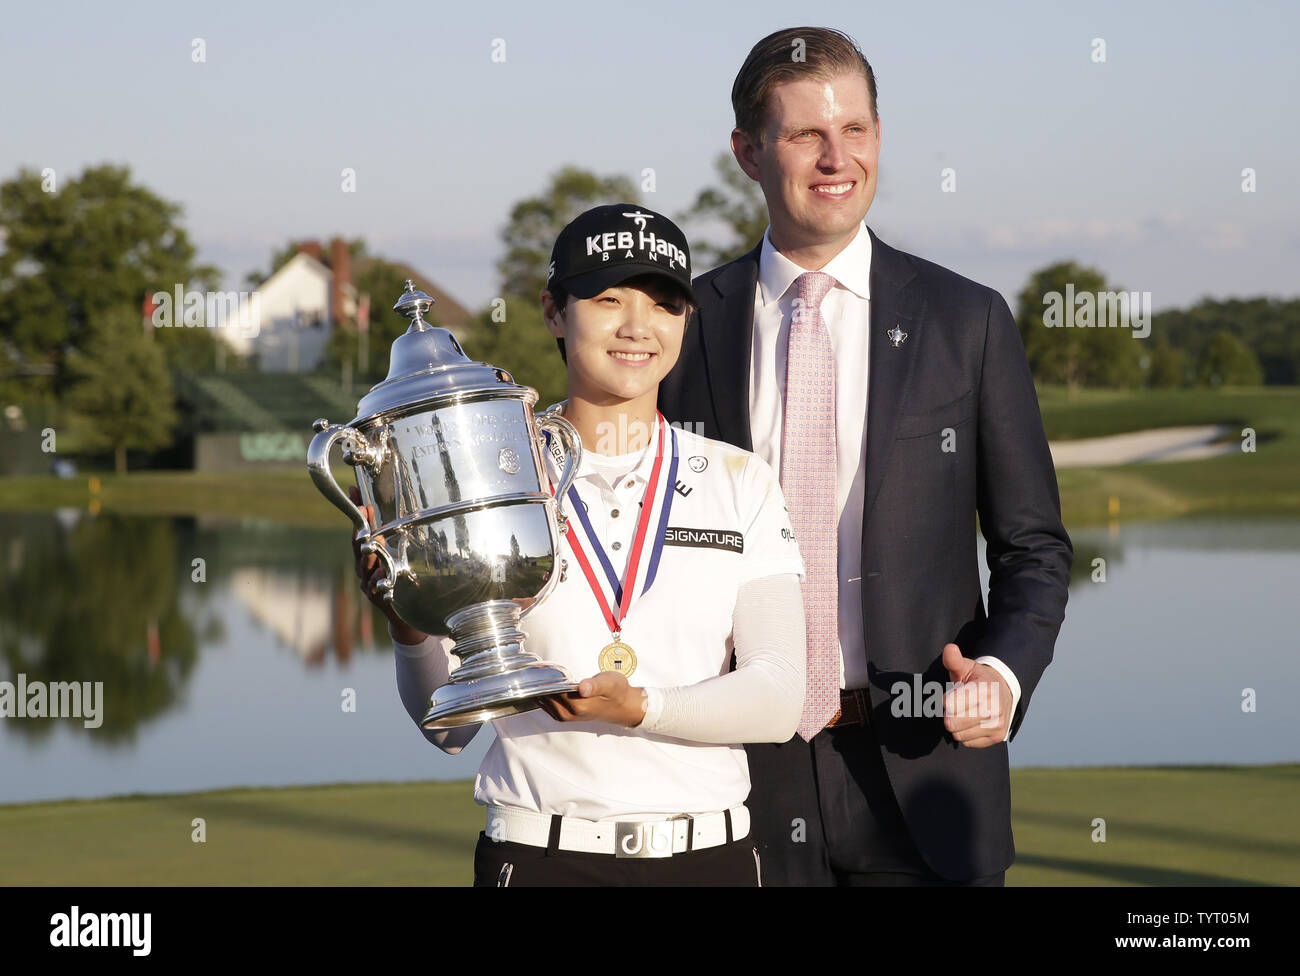 Eric Trump stands with Rookie Sung Hyun Park of South Korea who holds the championship trophy at Trump National Golf Club after the final round of the LPGA U.S. Women's Open Championship  in Bedminster, NJ on July 14, 2017. Park wins her first major with a score of 11 under par.      Photo by John Angelillo/UPI Stock Photo